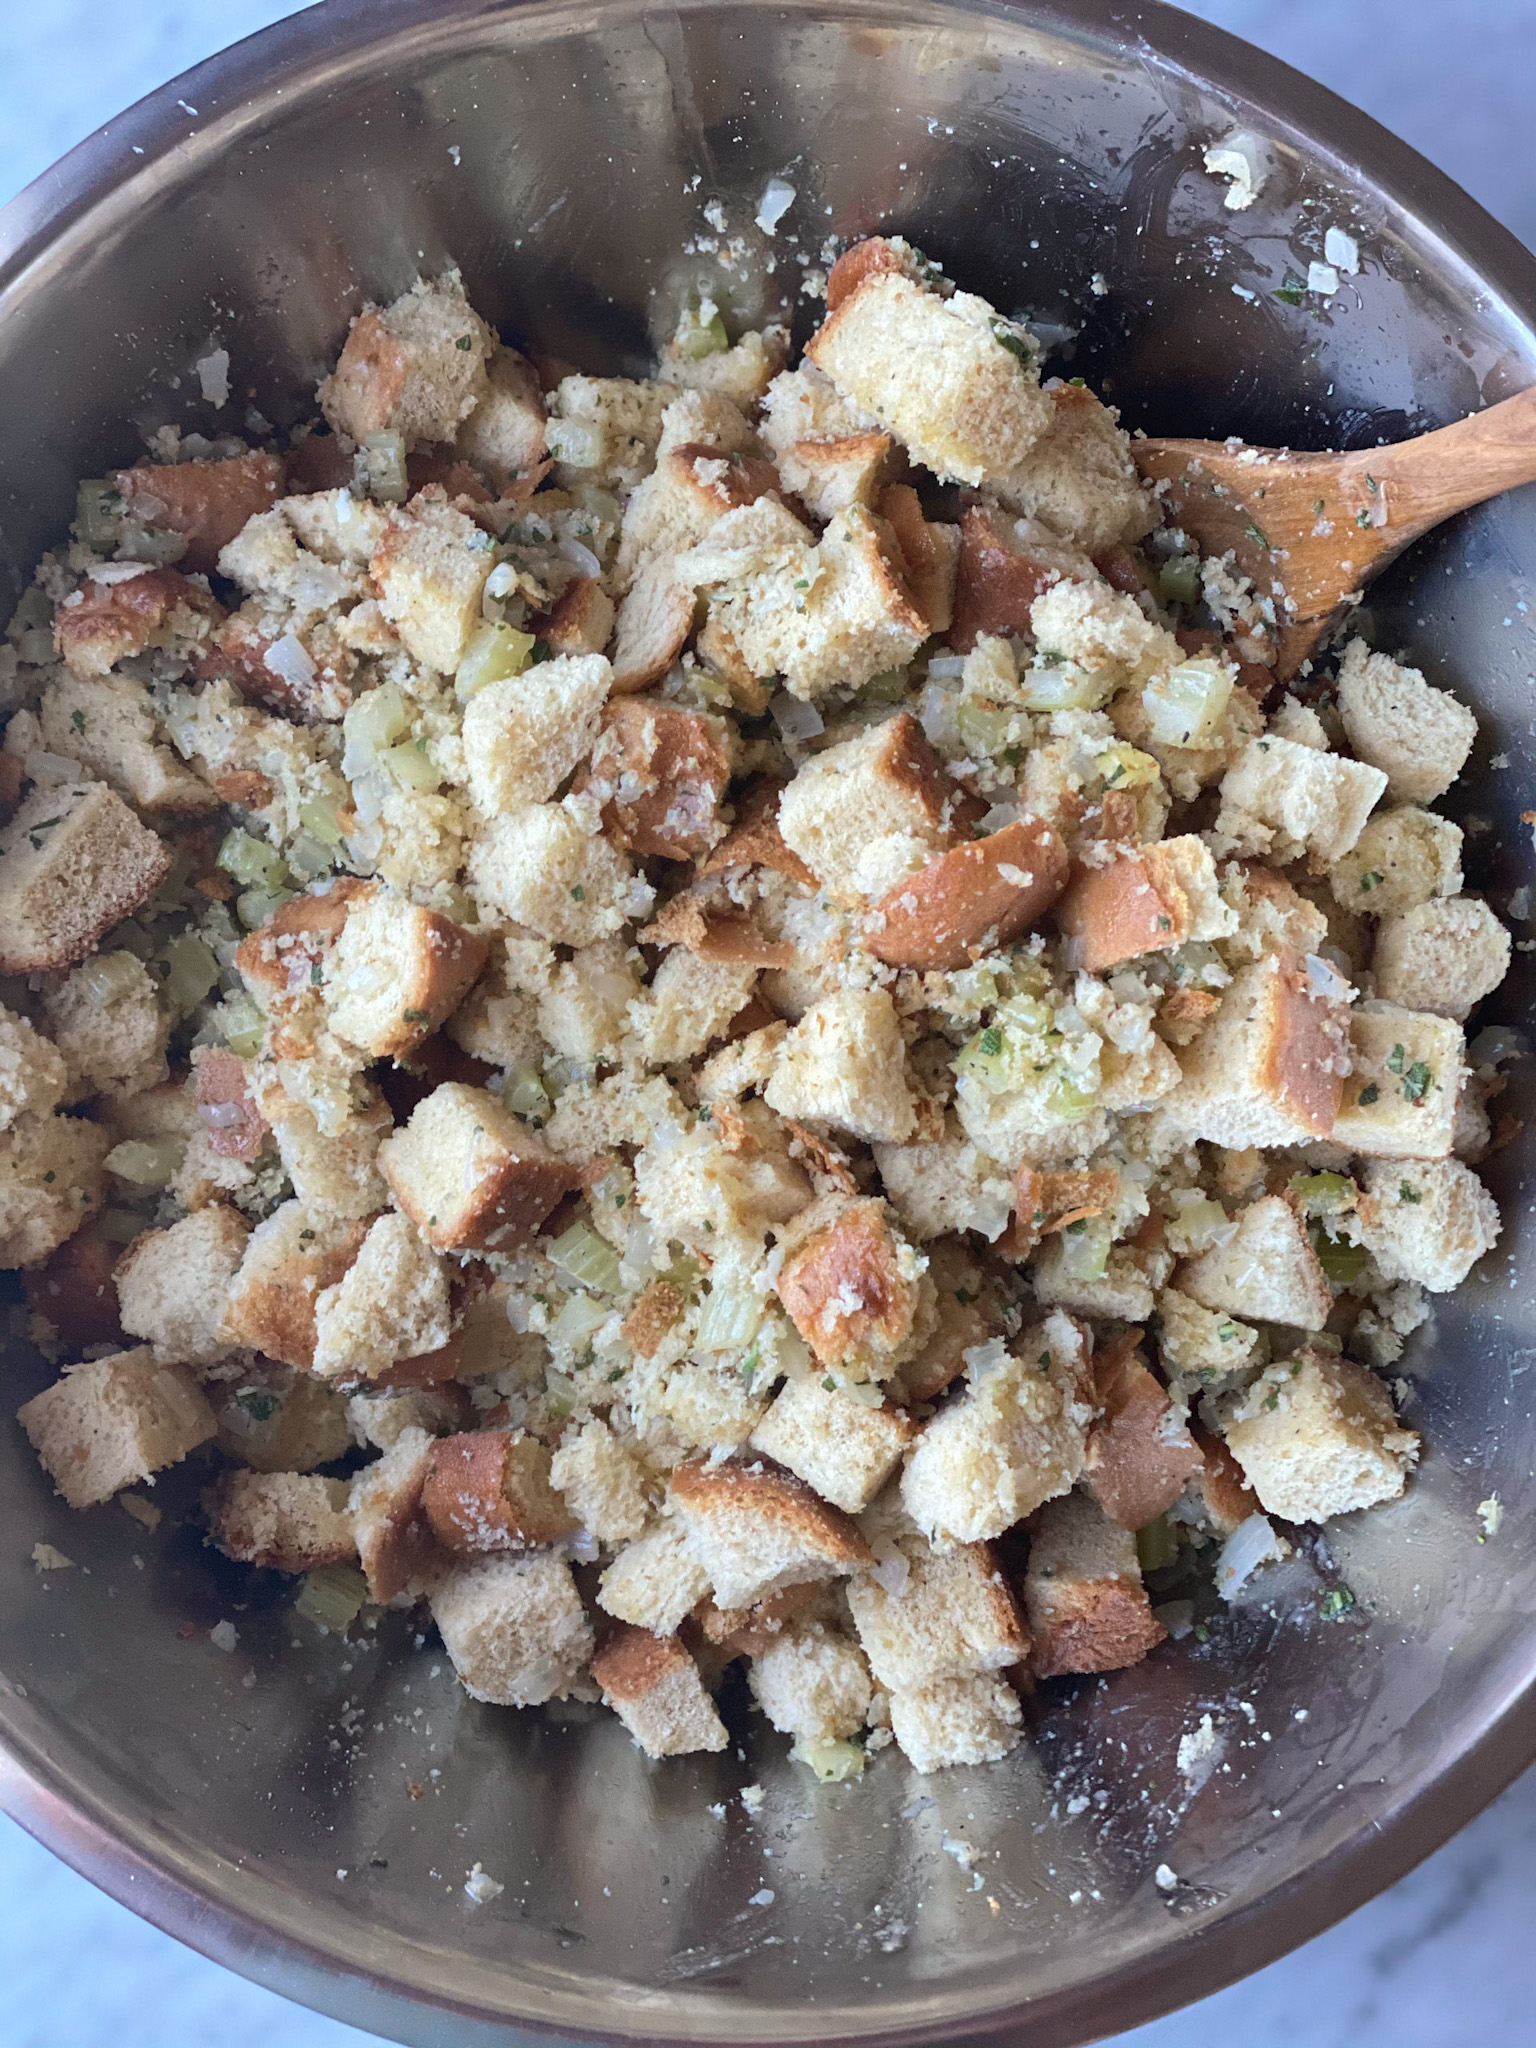 Raw stuffing in a bowl with seasoning on it